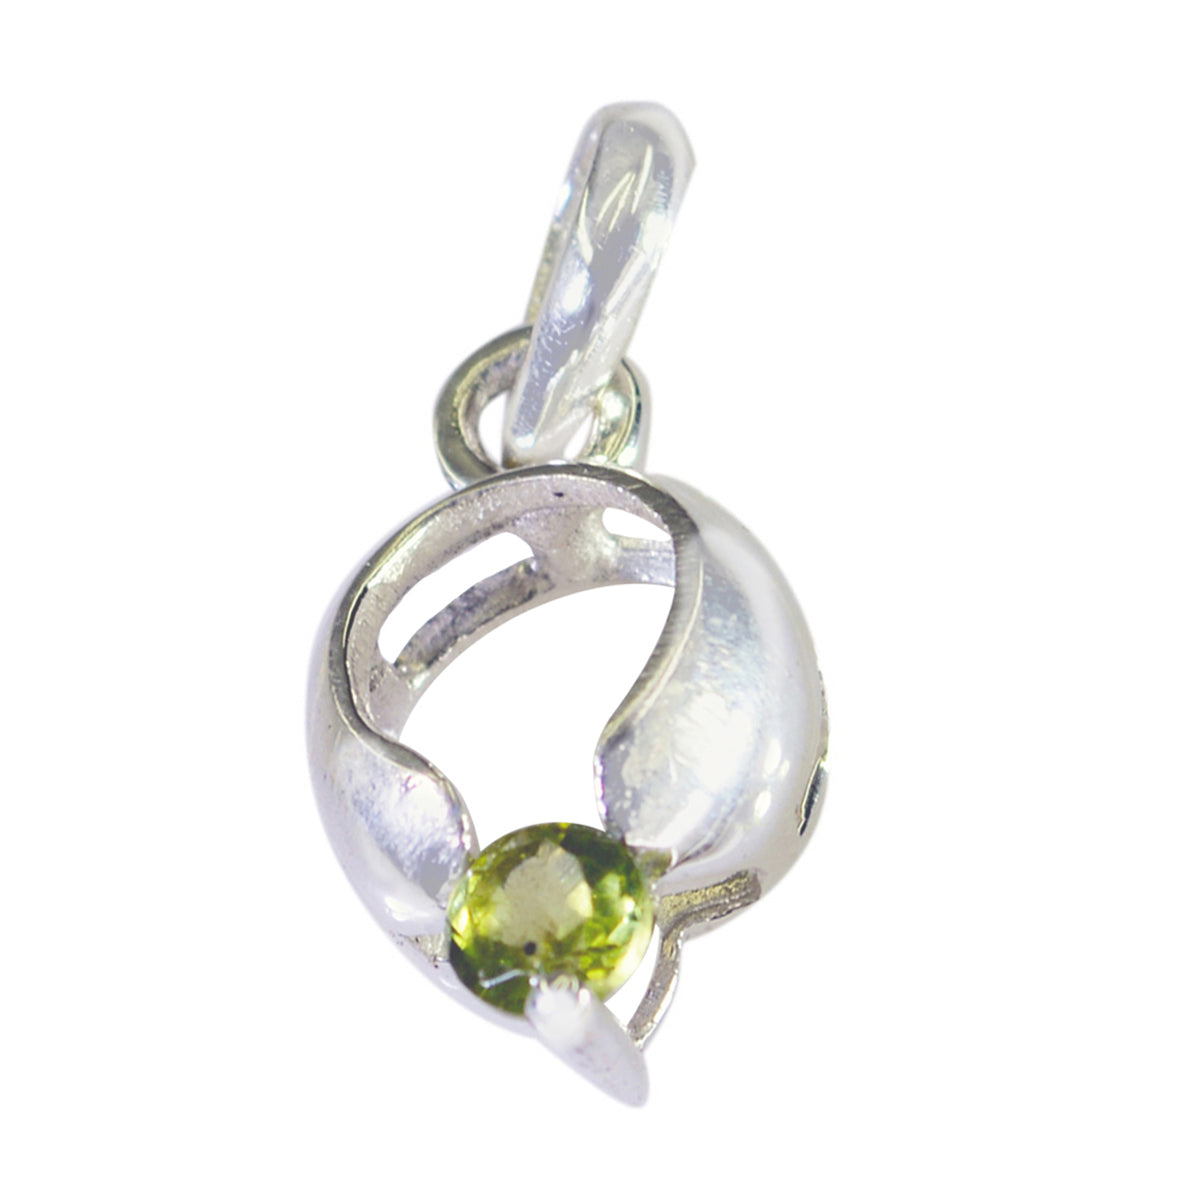 Riyo Beaut Gemstone Round Faceted Green Peridot 947 Sterling Silver Pendant Gift For Teachers Day